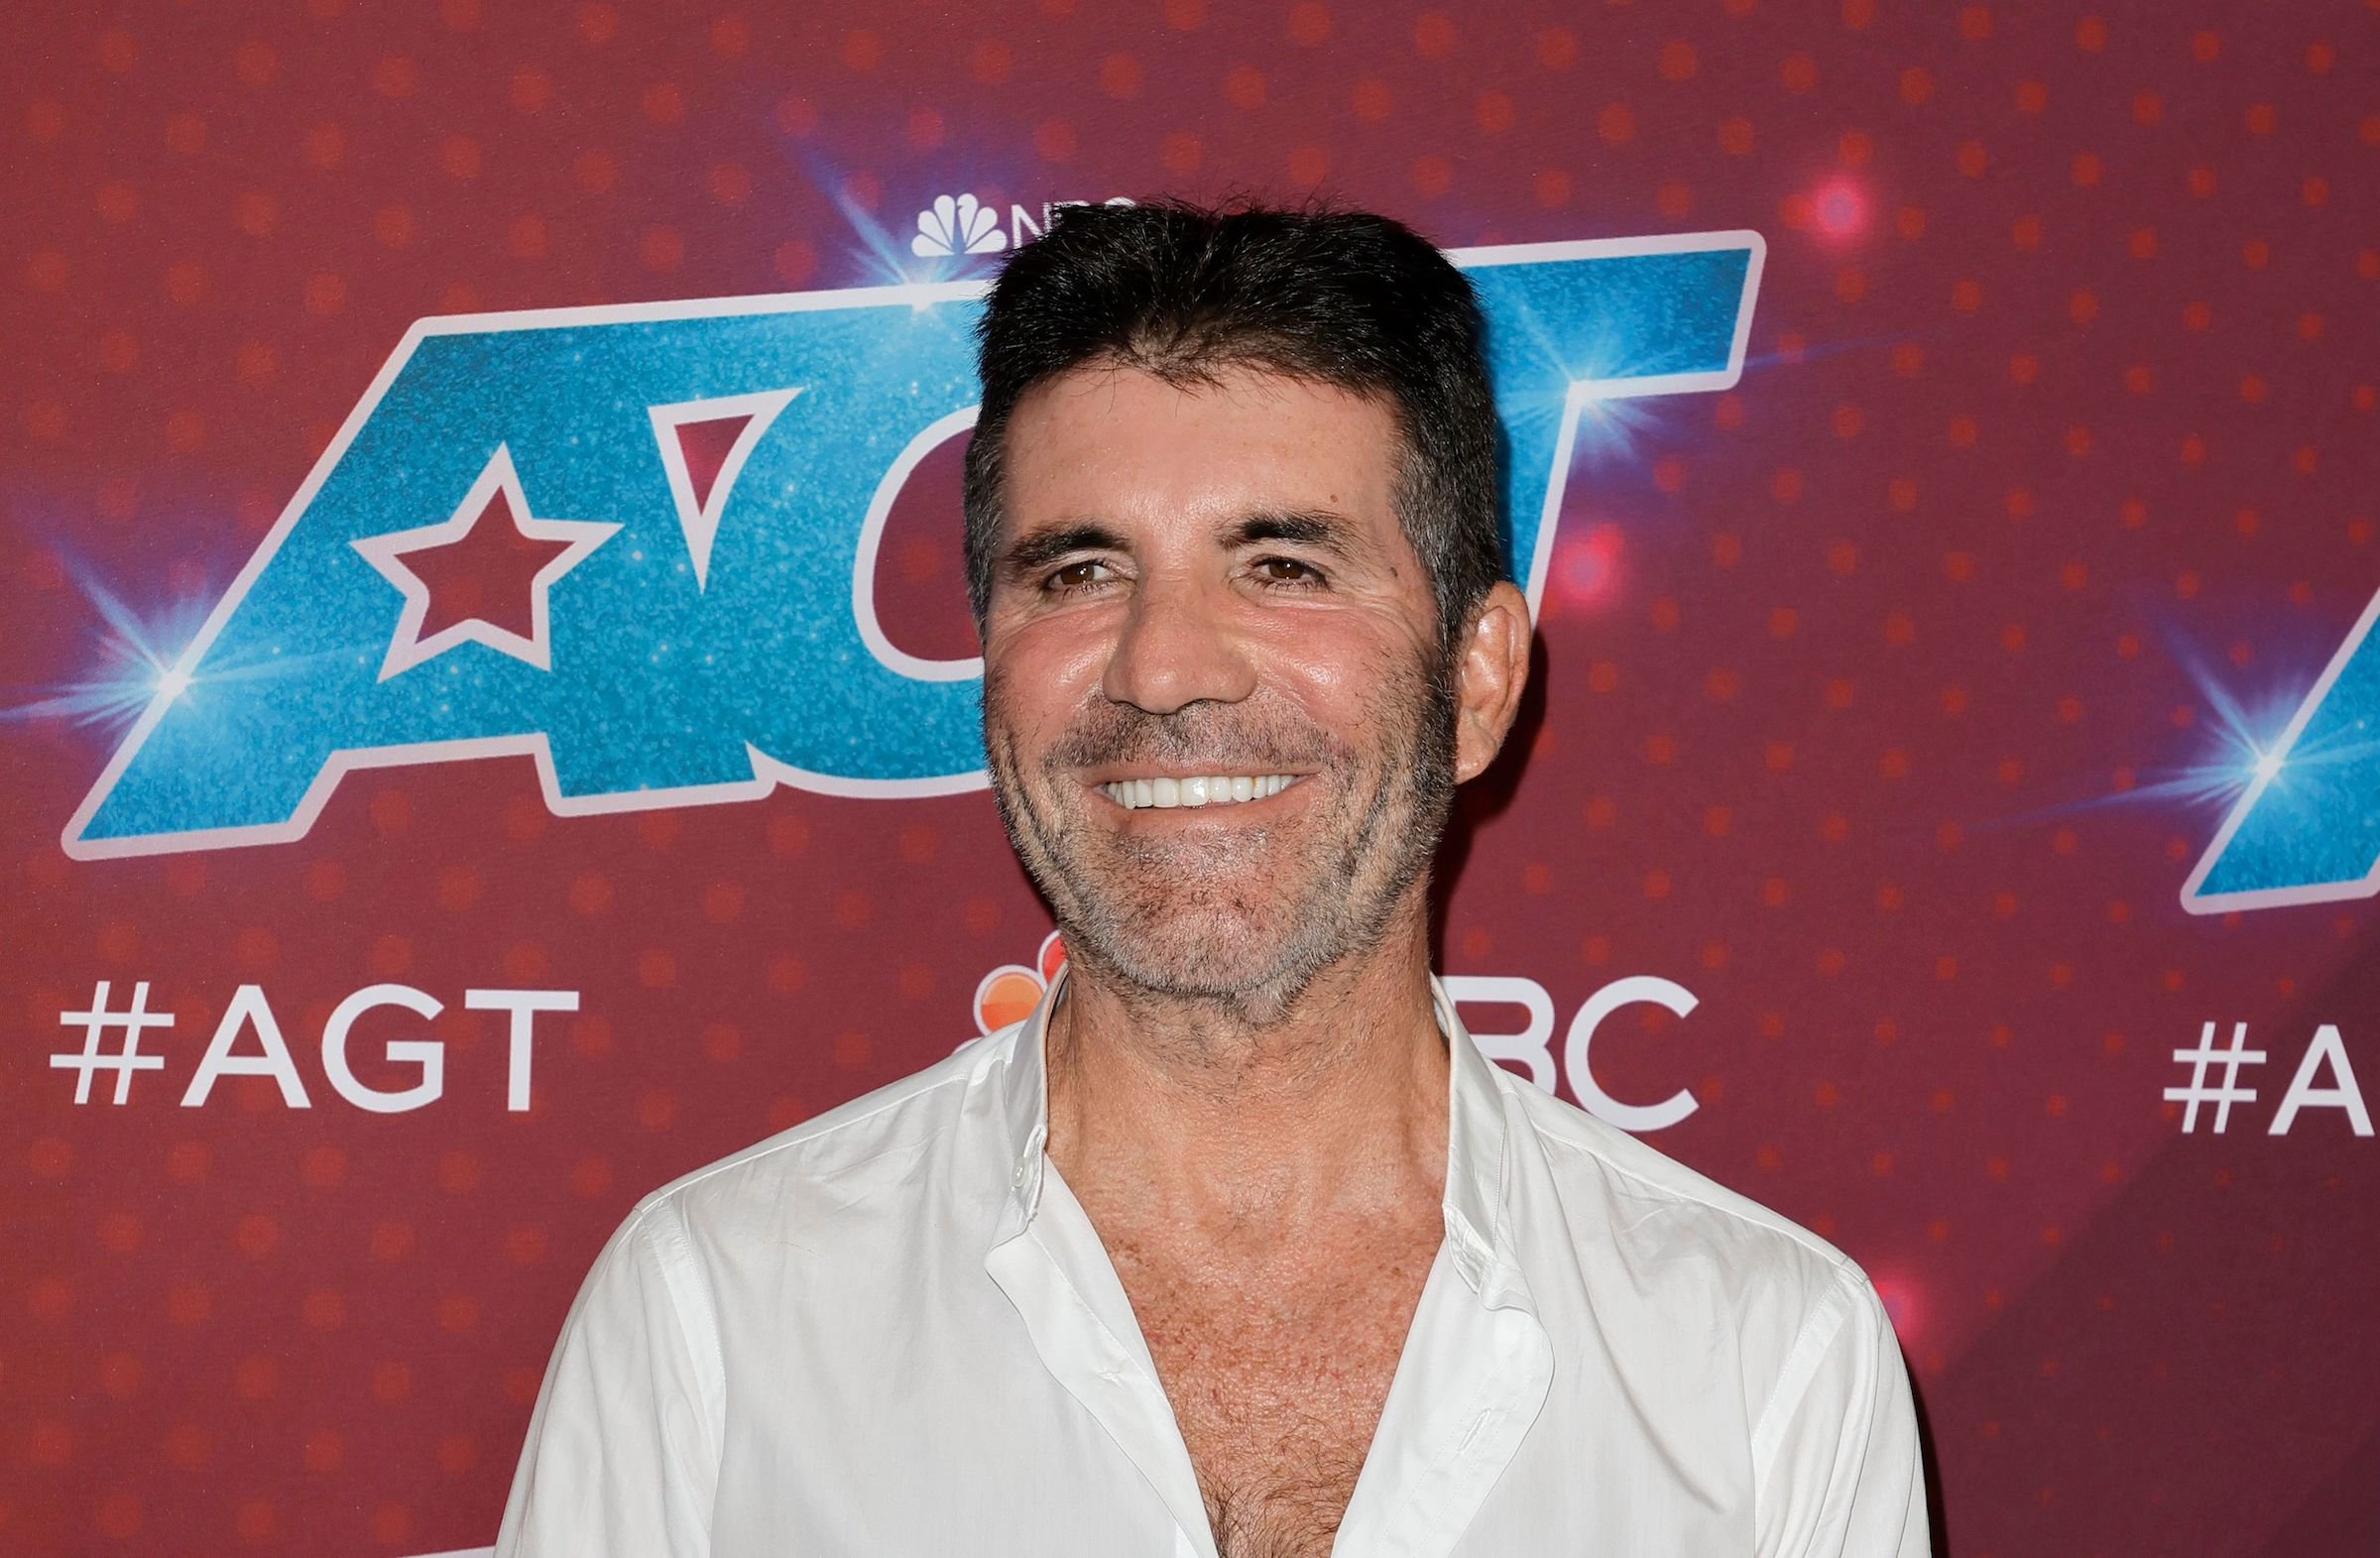 Simon Cowell, who once doubted Jennifer Hudson, wearing a white shirt on the red carpet.